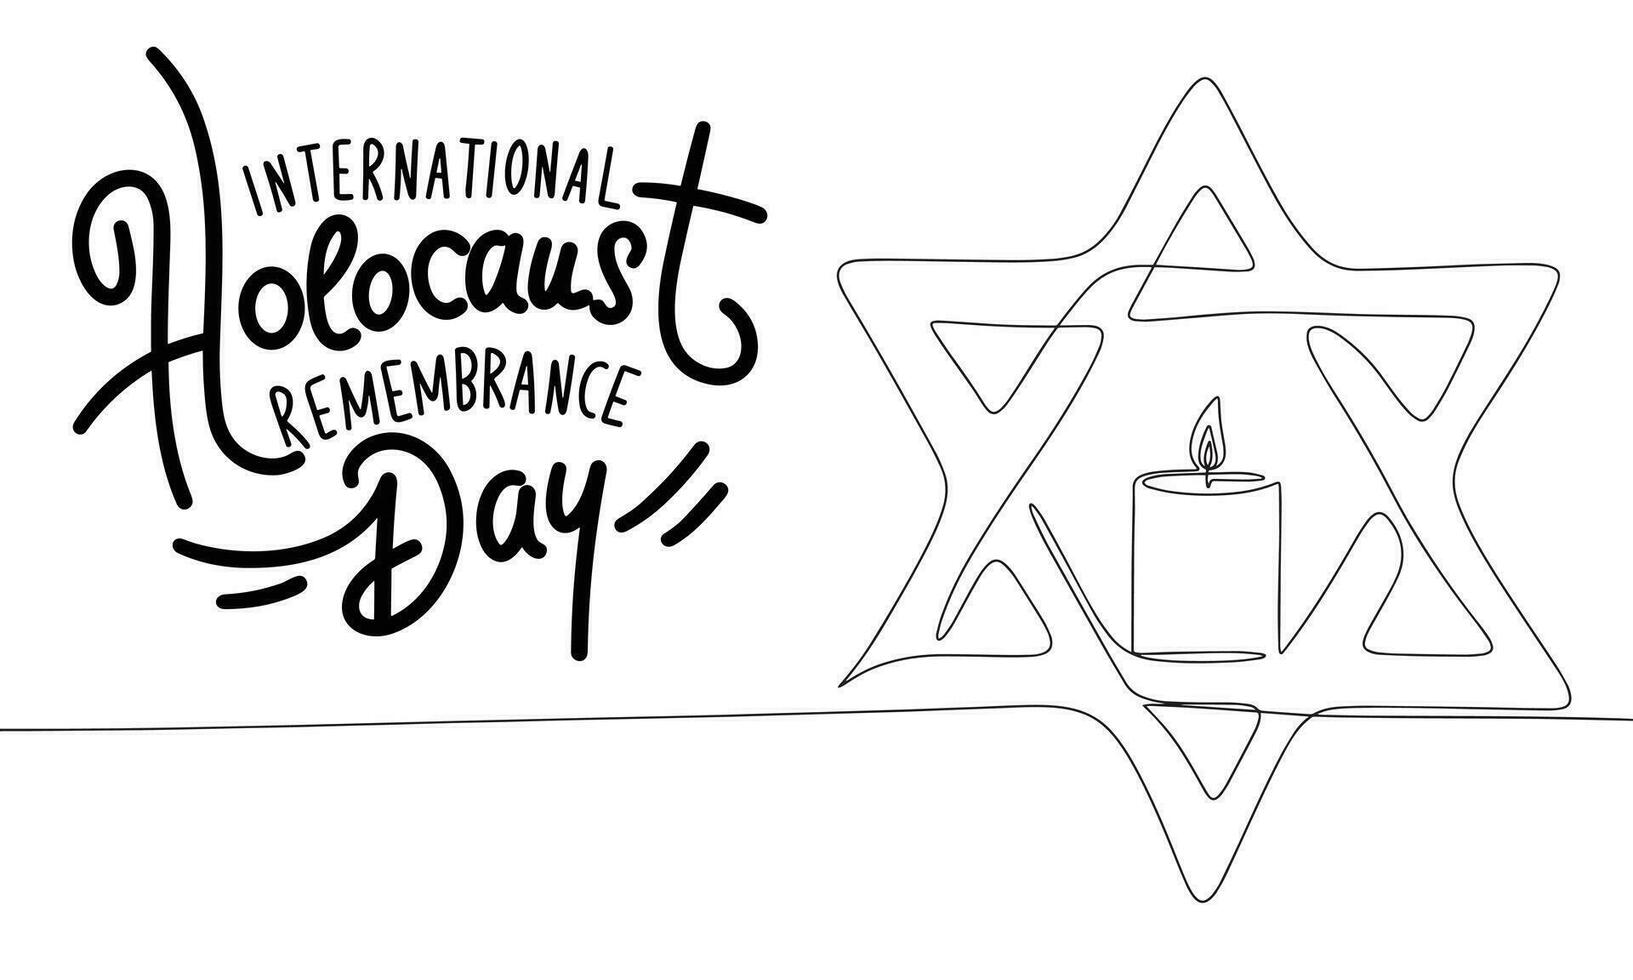 International Holocaust Remembrance Day banner. Handwriting inscription, International Holocaust Remembrance Day. Line art David's star and candle. Hand drawn vector art.